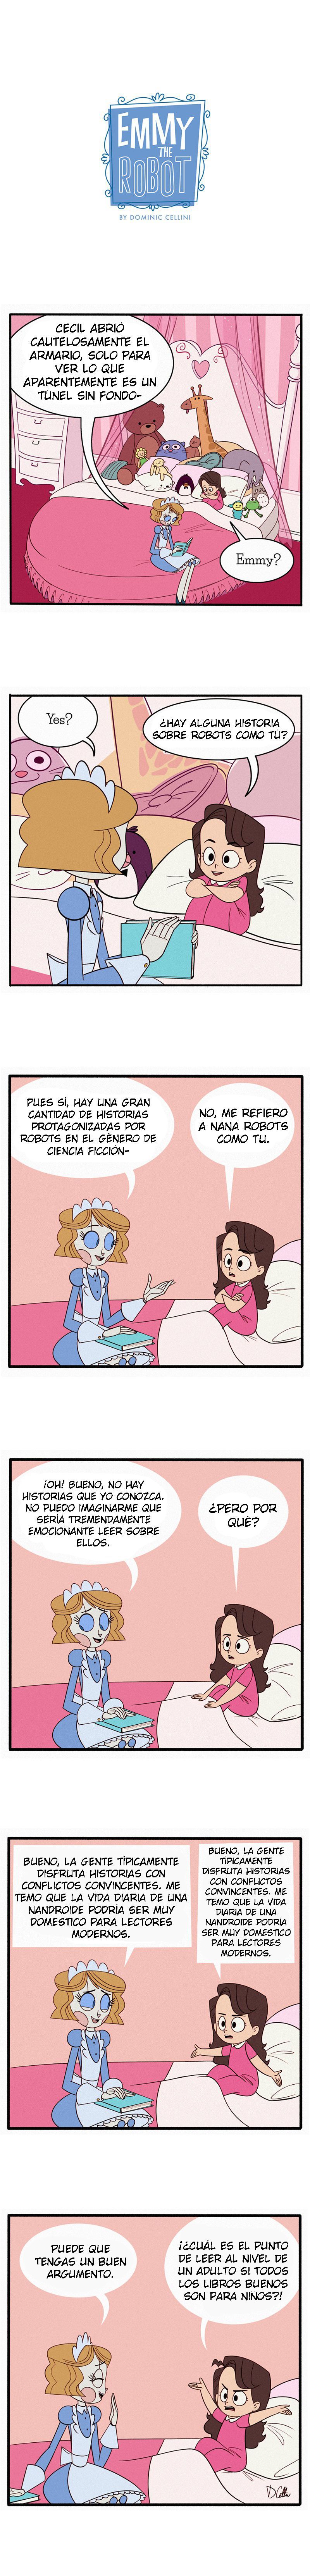 Emmy The Robot [Spanish] (Ongoing) 31